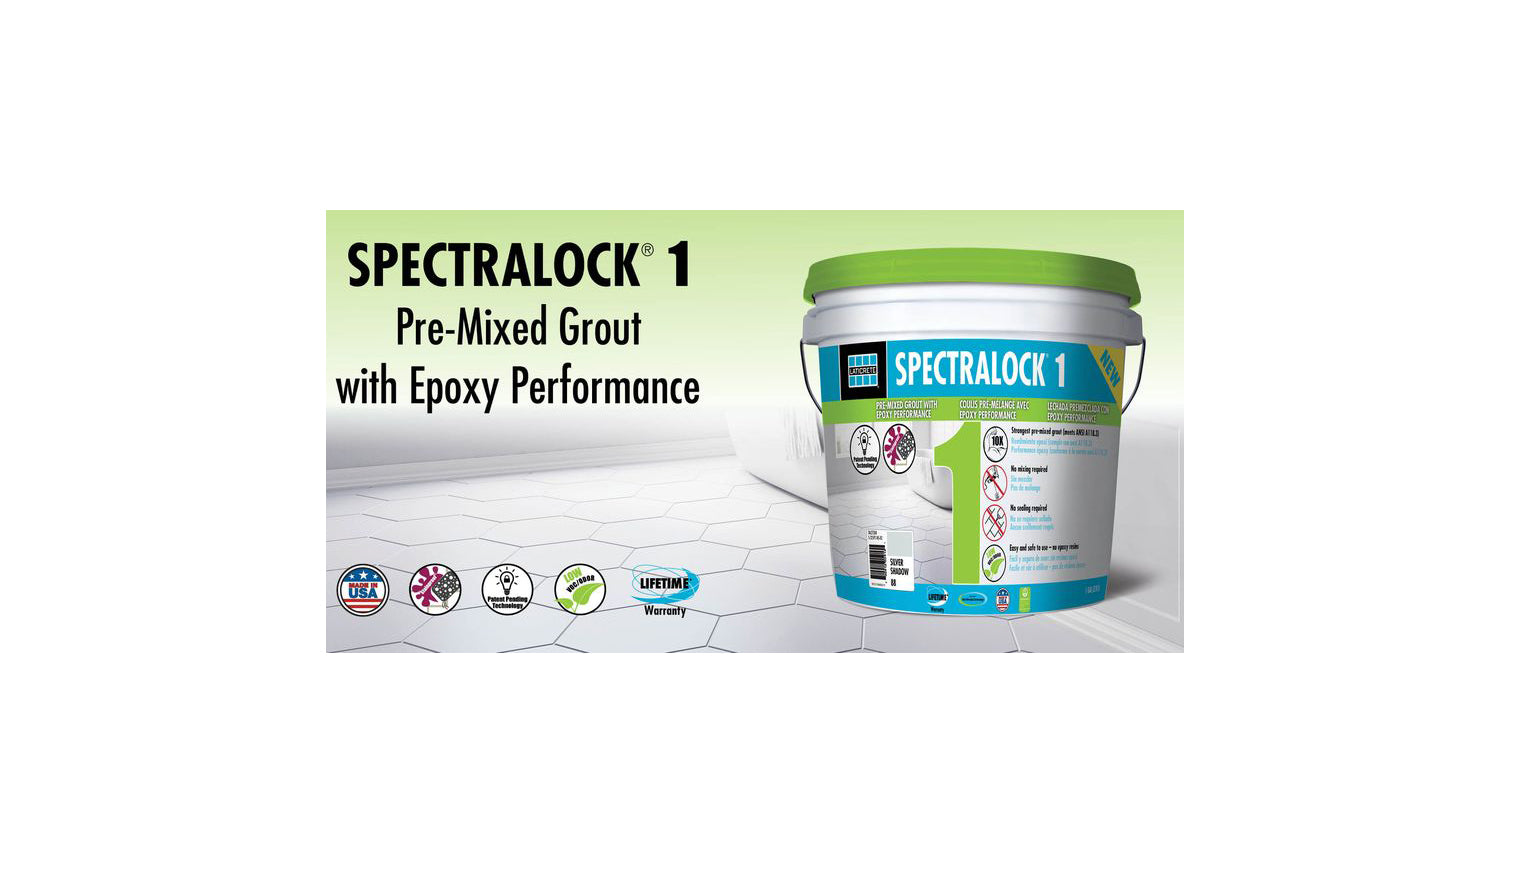 SPECTRALOCK 1 Pre-Mixed Grout